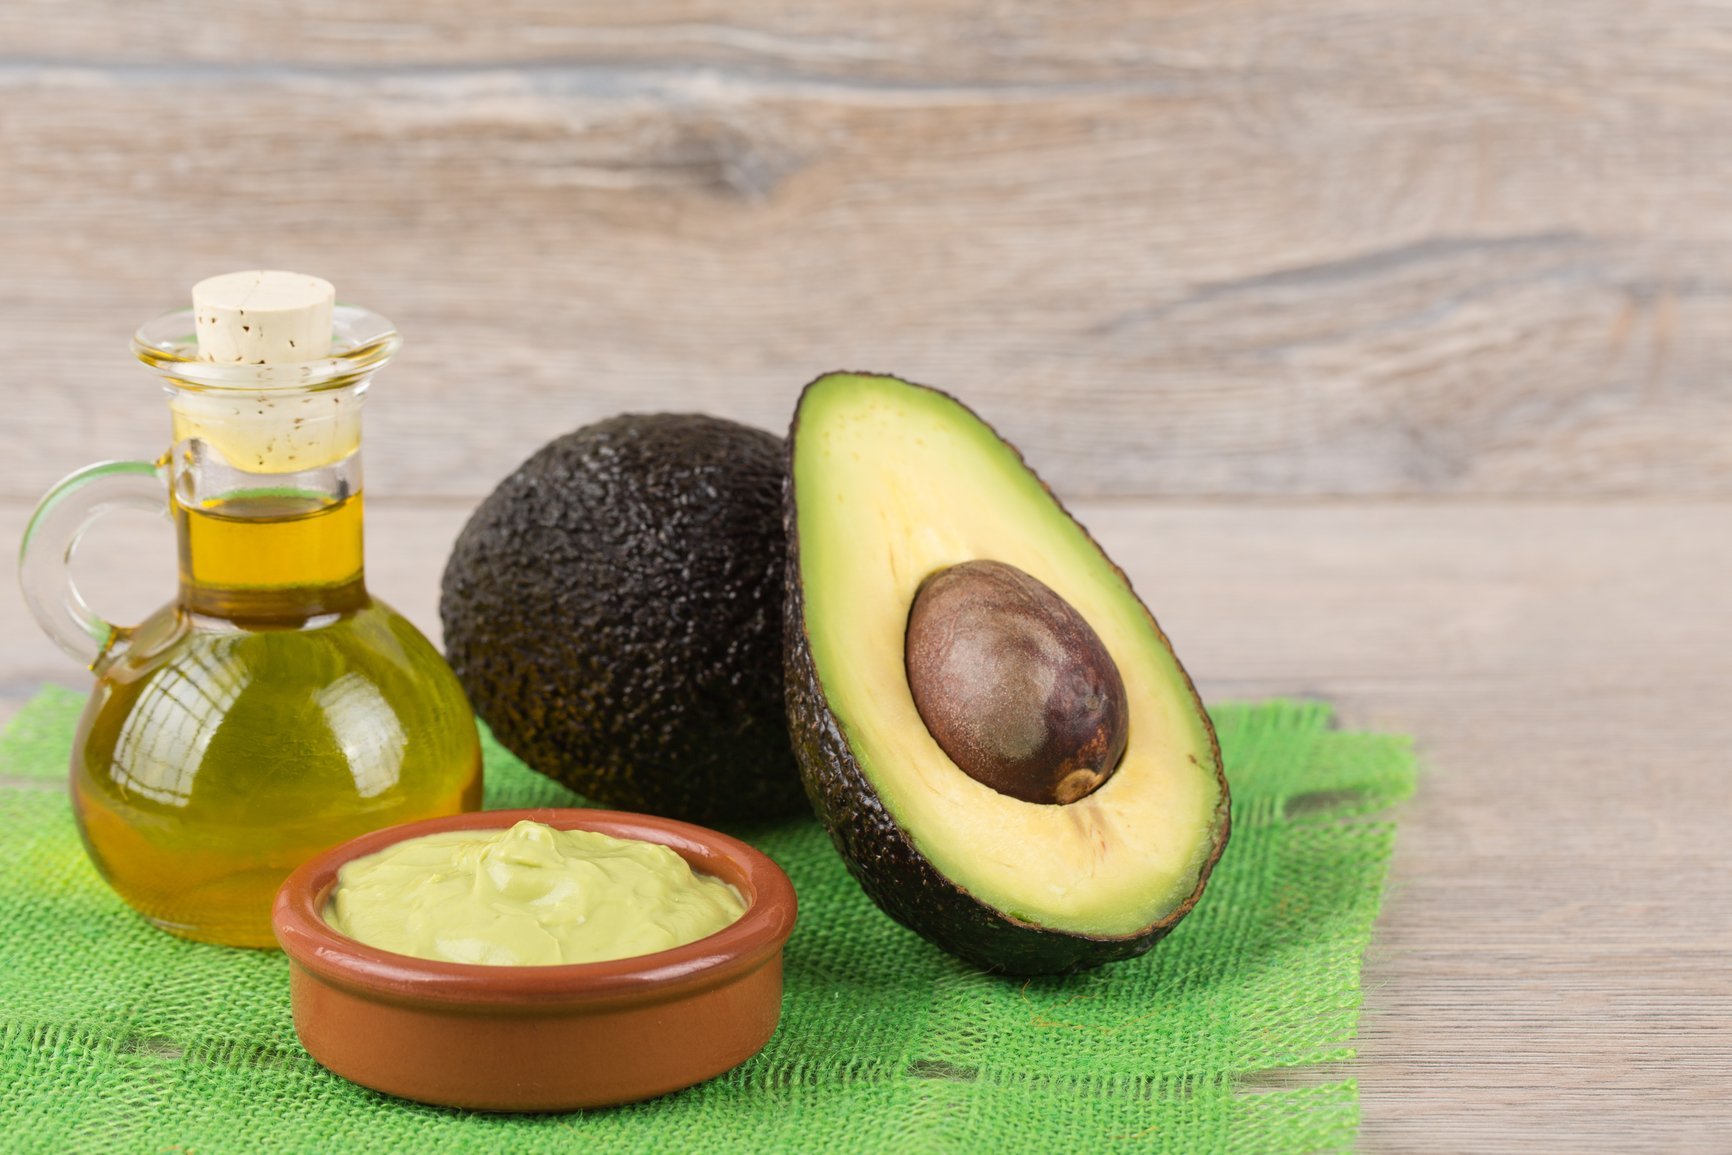 Global Avocado Oil Market Is Estimated To Witness High Growth Owing To Increasing Demand for Natural Cooking Oils